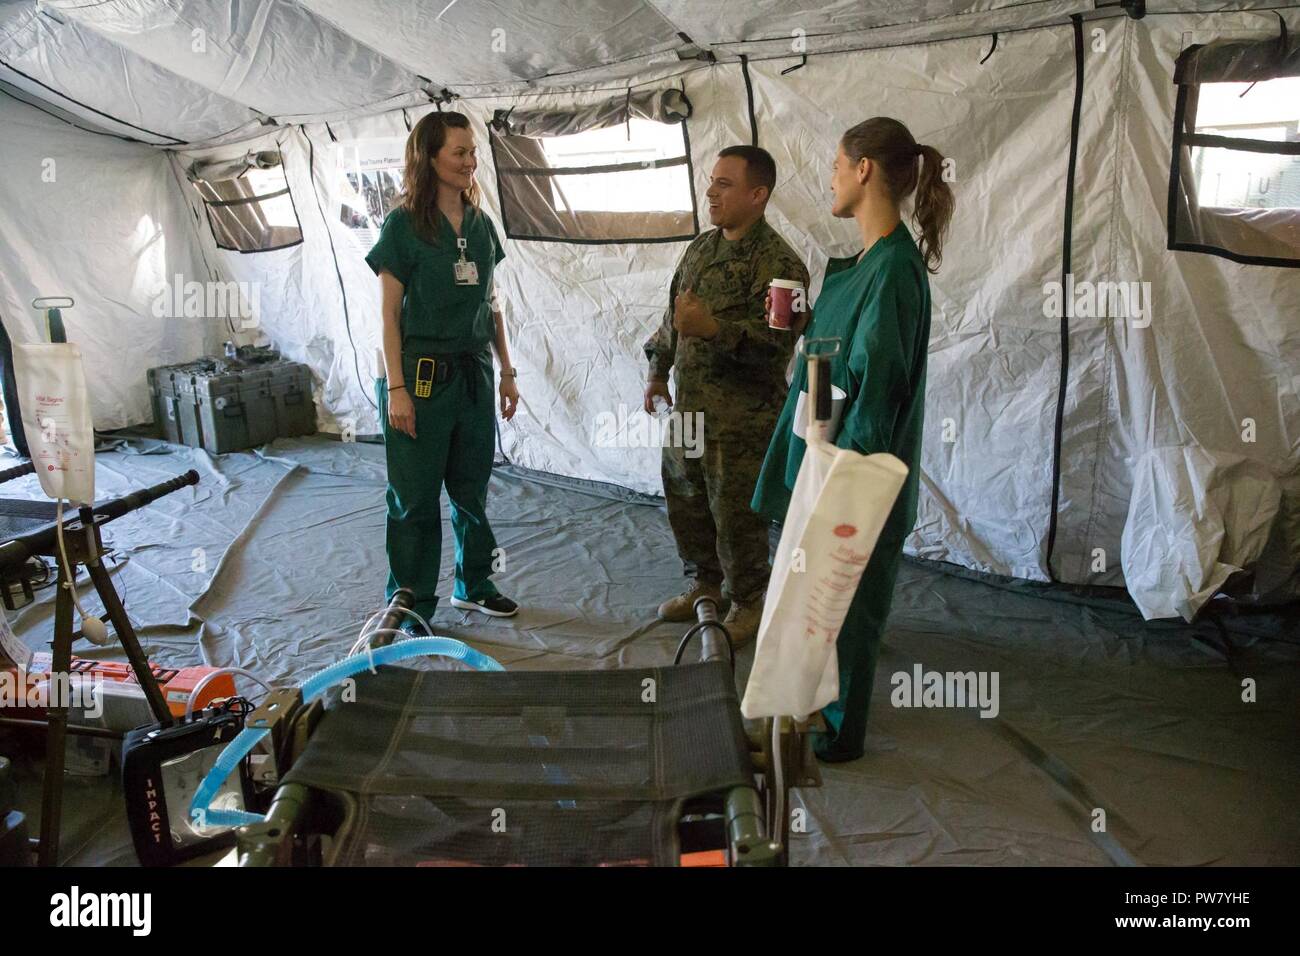 U.S. Navy Hospitalman 3rd Class Juan Barajas, corpsman, Charlie Company, 1st Medical Battalion, talks to nurses about the surgical tent portion of the Shock Trauma Platoon (STP) Field Surgical Tent capabilities and how they can be used in crisis response situations  at the Zuckerberg San Francisco General Hospital and Trauma Center Oct. 2, 2017. The STP Field Surgical Tent is used as an initial trauma care center designed to treat and stabilize patients prior to being moved to follow on care in a field environment. Stock Photo